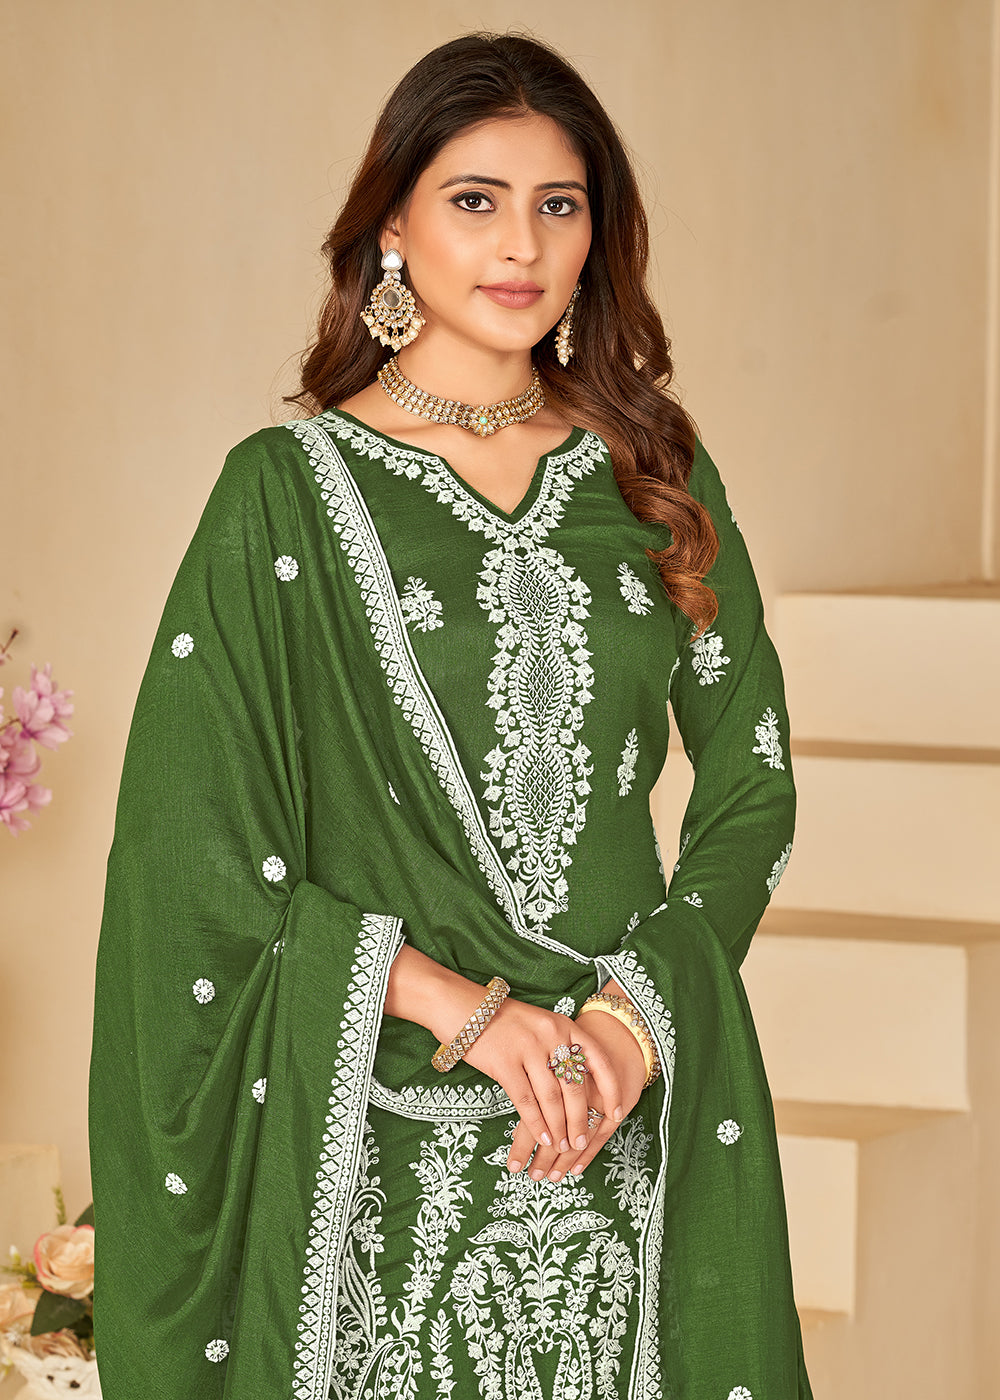 Buy Now Art Silk Pretty Green Embroidered Palazzo Style Suit Online in USA, UK, Canada, Germany, Australia & Worldwide at Empress Clothing.